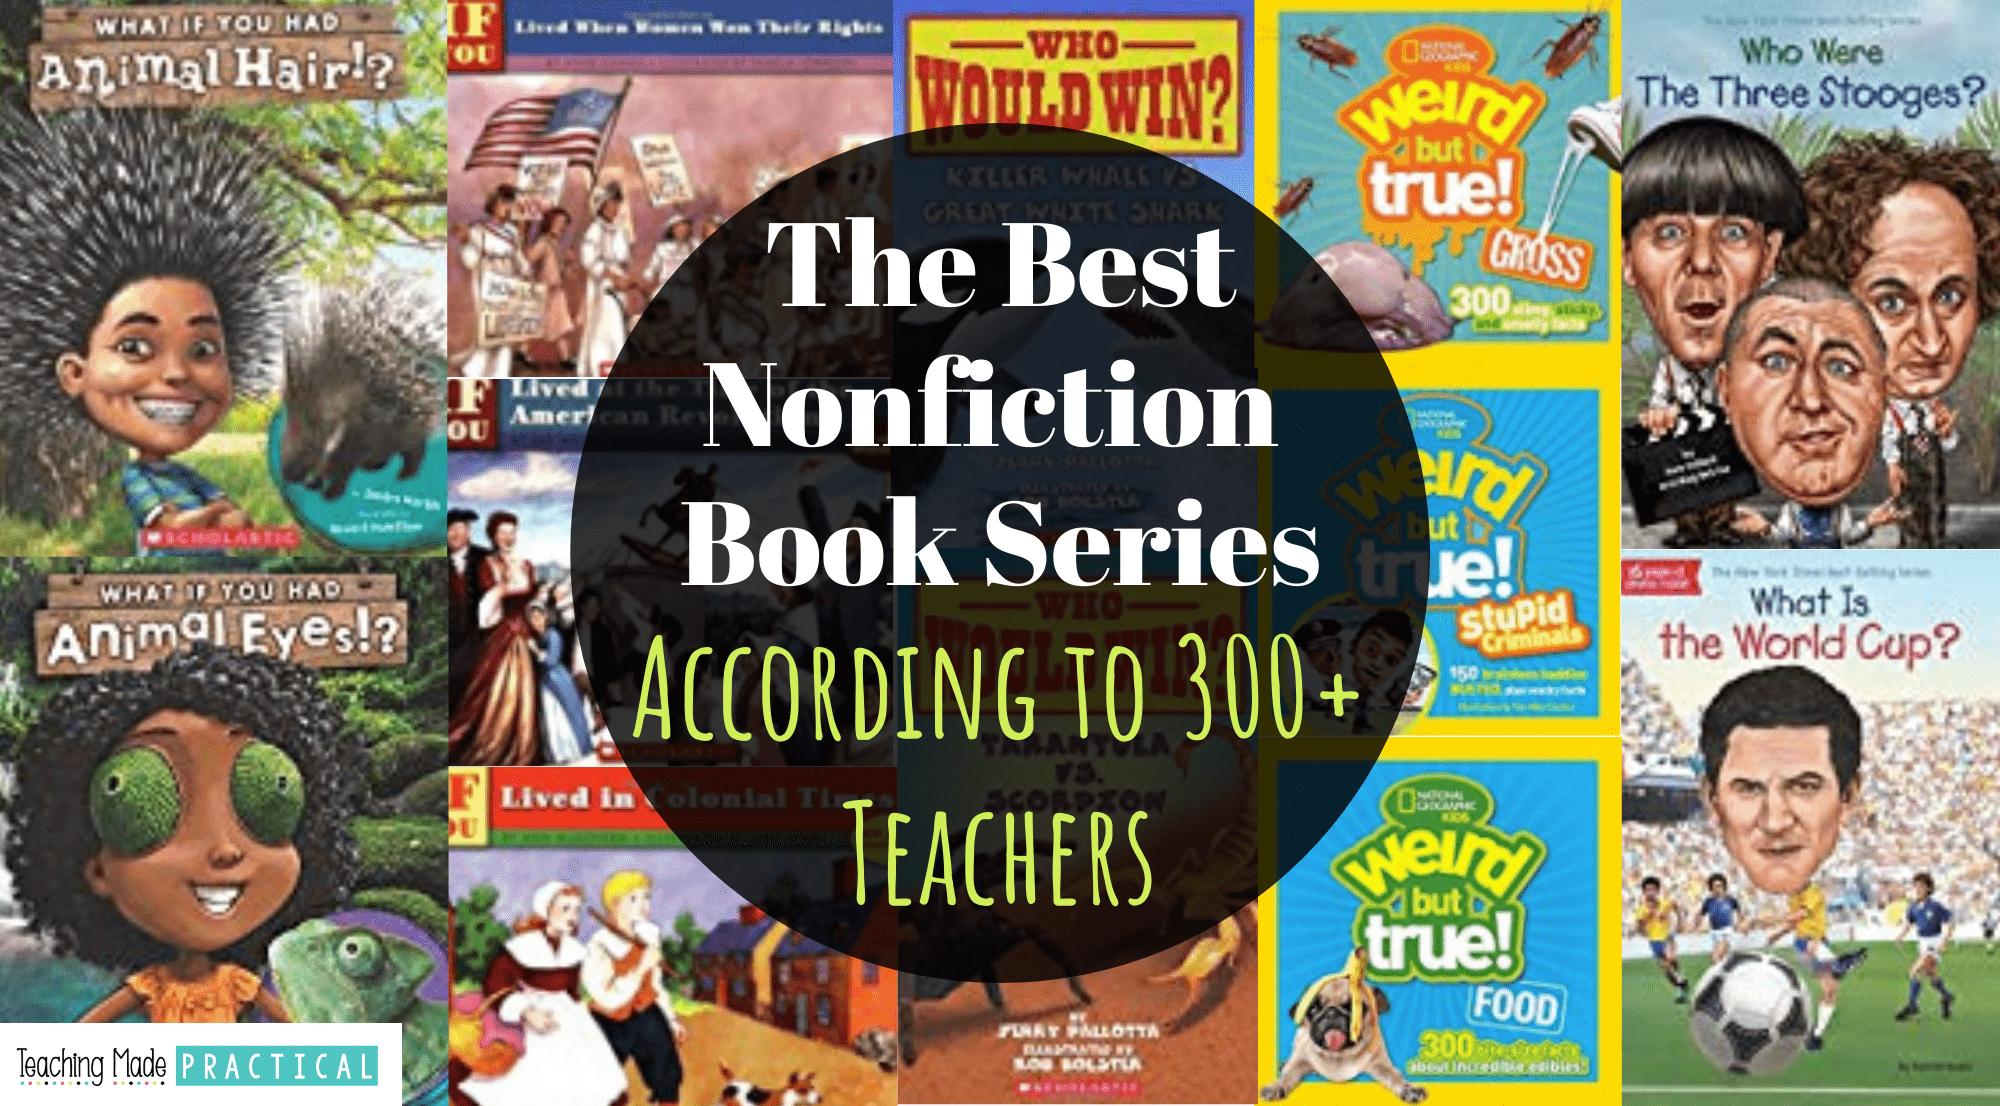 the best nonfiction book series for 3rd grade, 4th grade, and 5th grade students